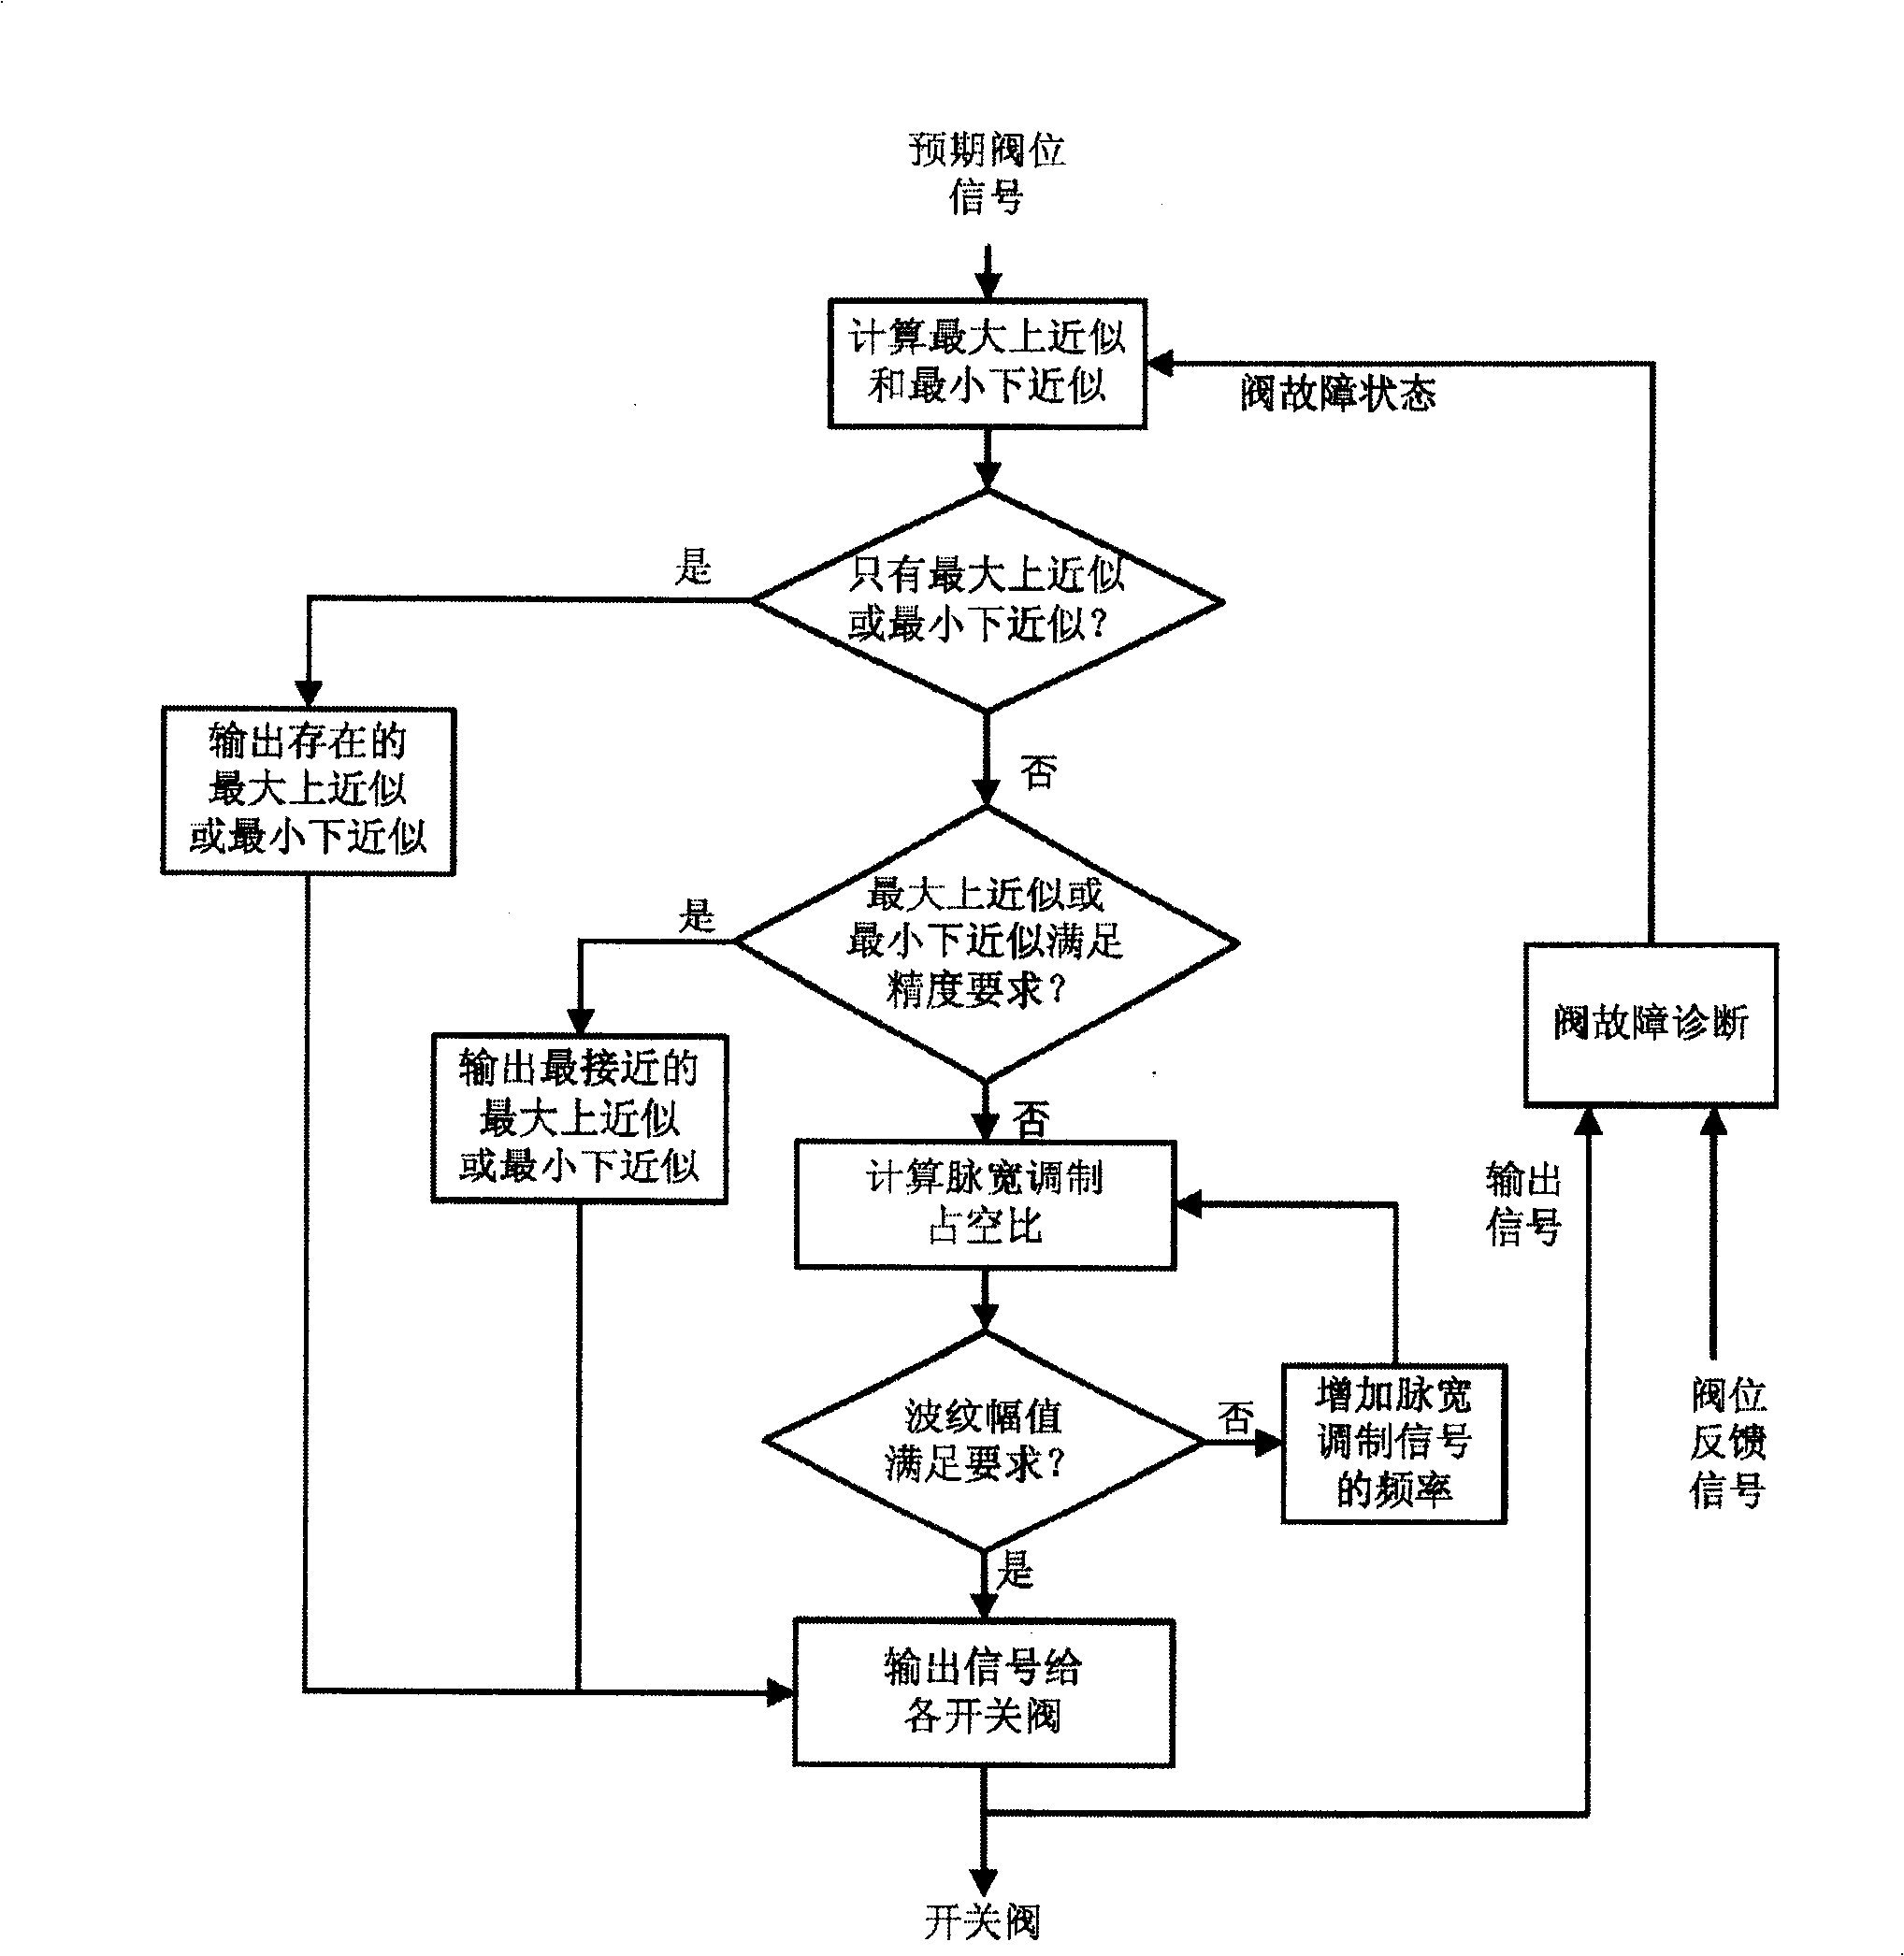 Flow control system and control method in mixed mode of pulse code modulation and pulse width modulation